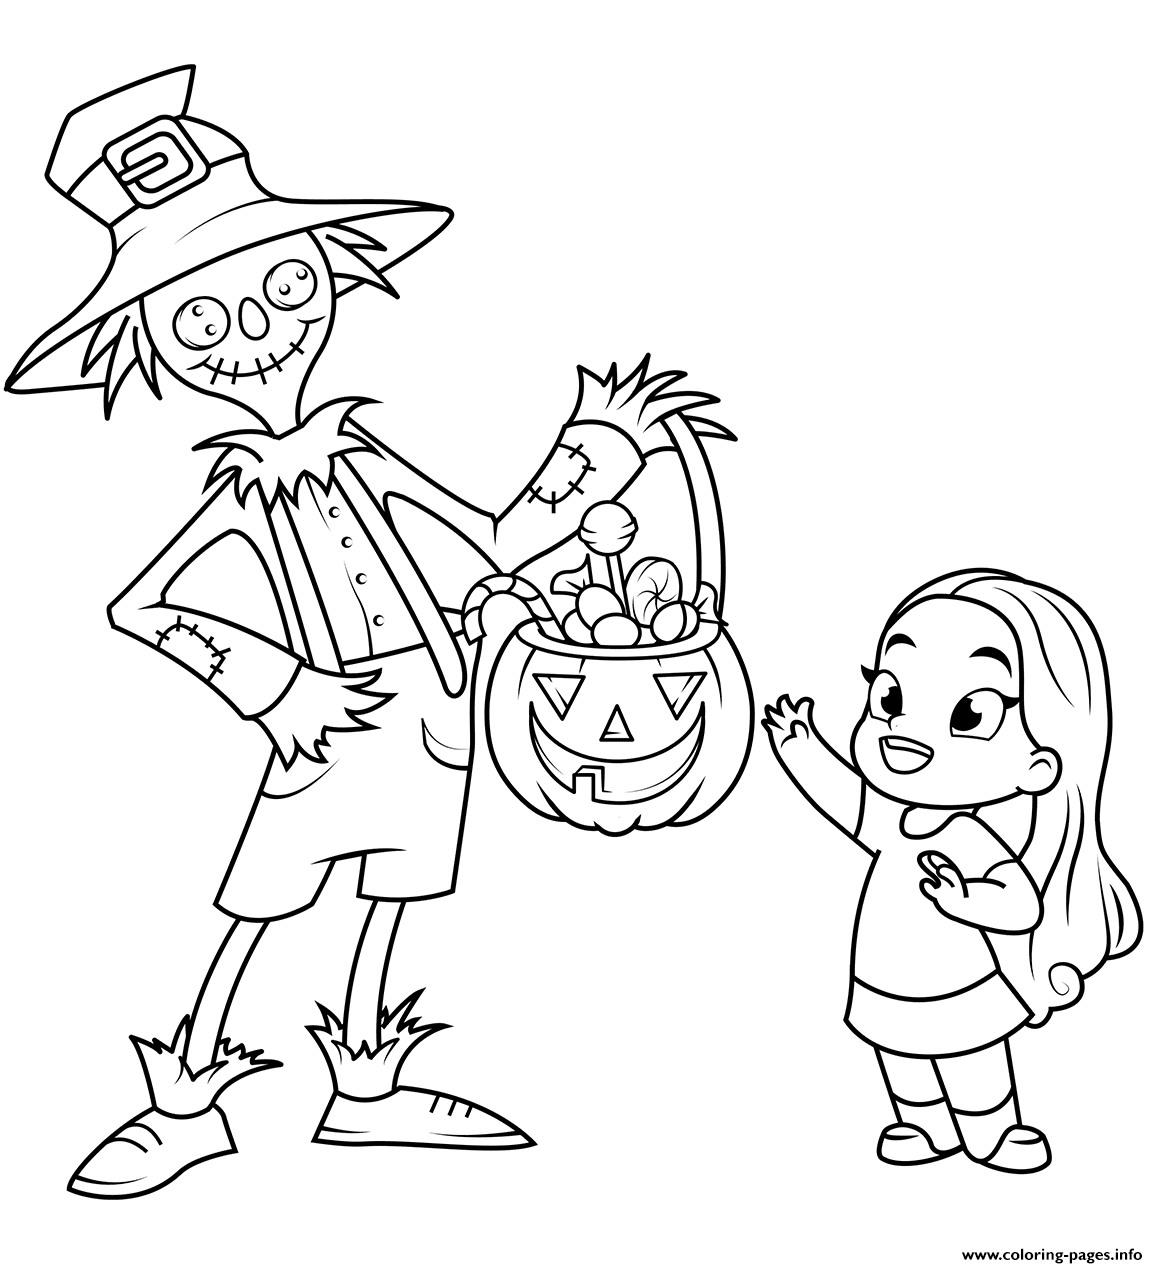 Scarecrow Treats A Little Girl With Sweets Halloween Coloring Pages